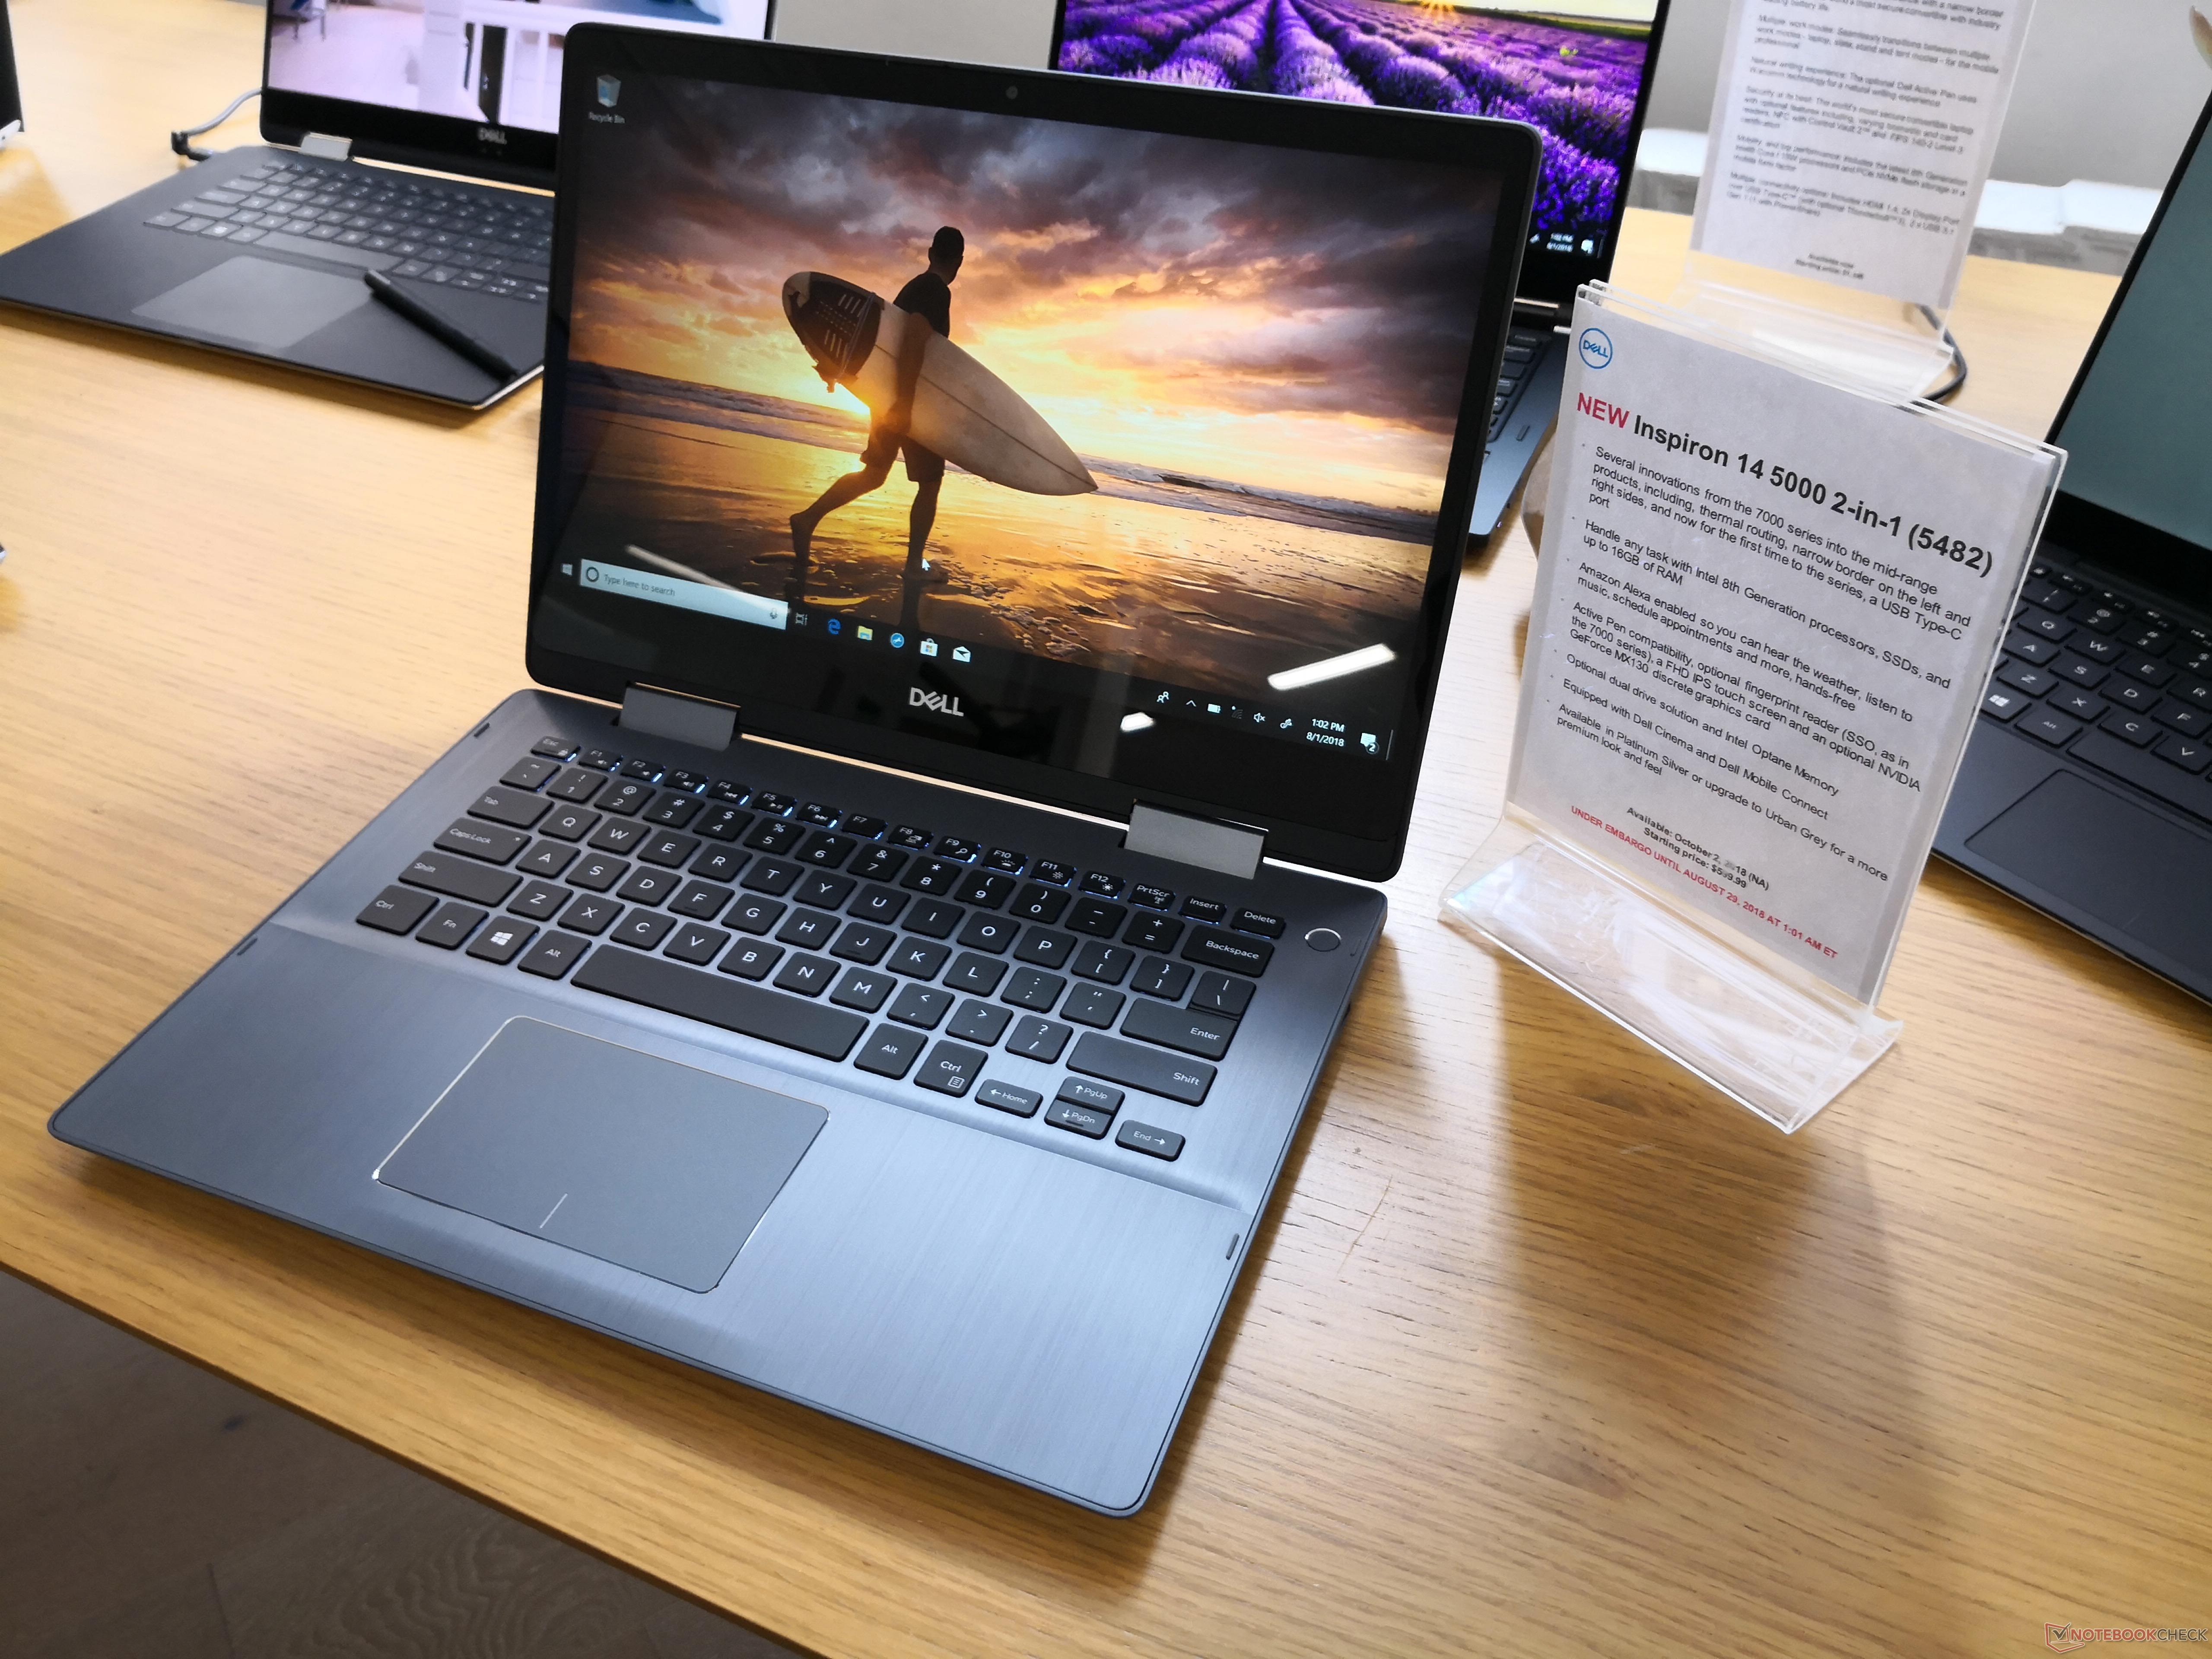 Dell Inspiron 14 5000 And Inspiron Chromebook 14 Coming This October For 600 Usd Notebookcheck Net News